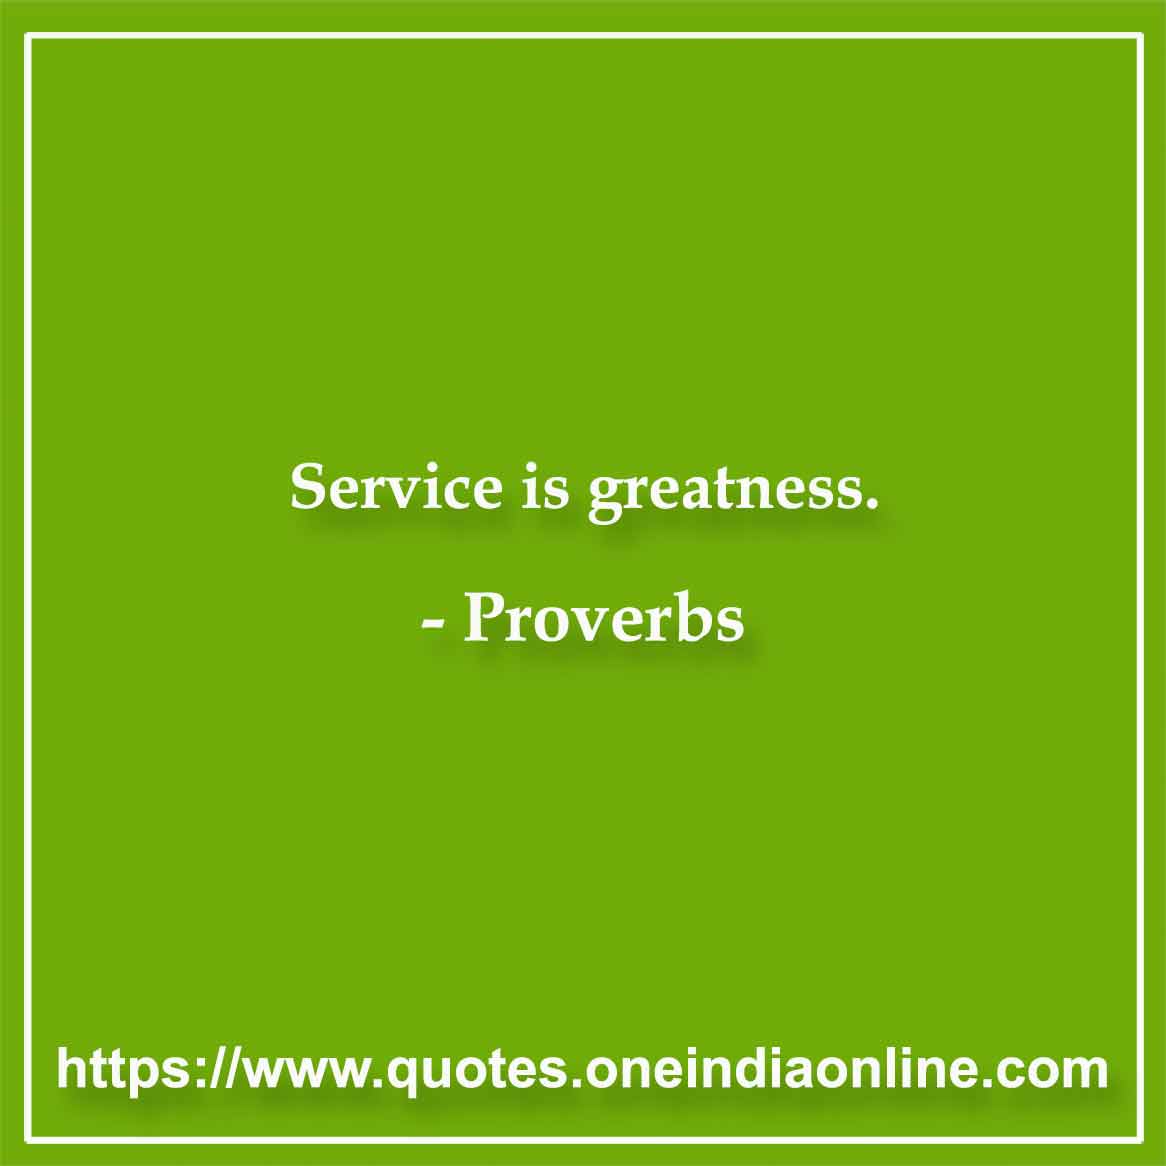 Service is greatness.